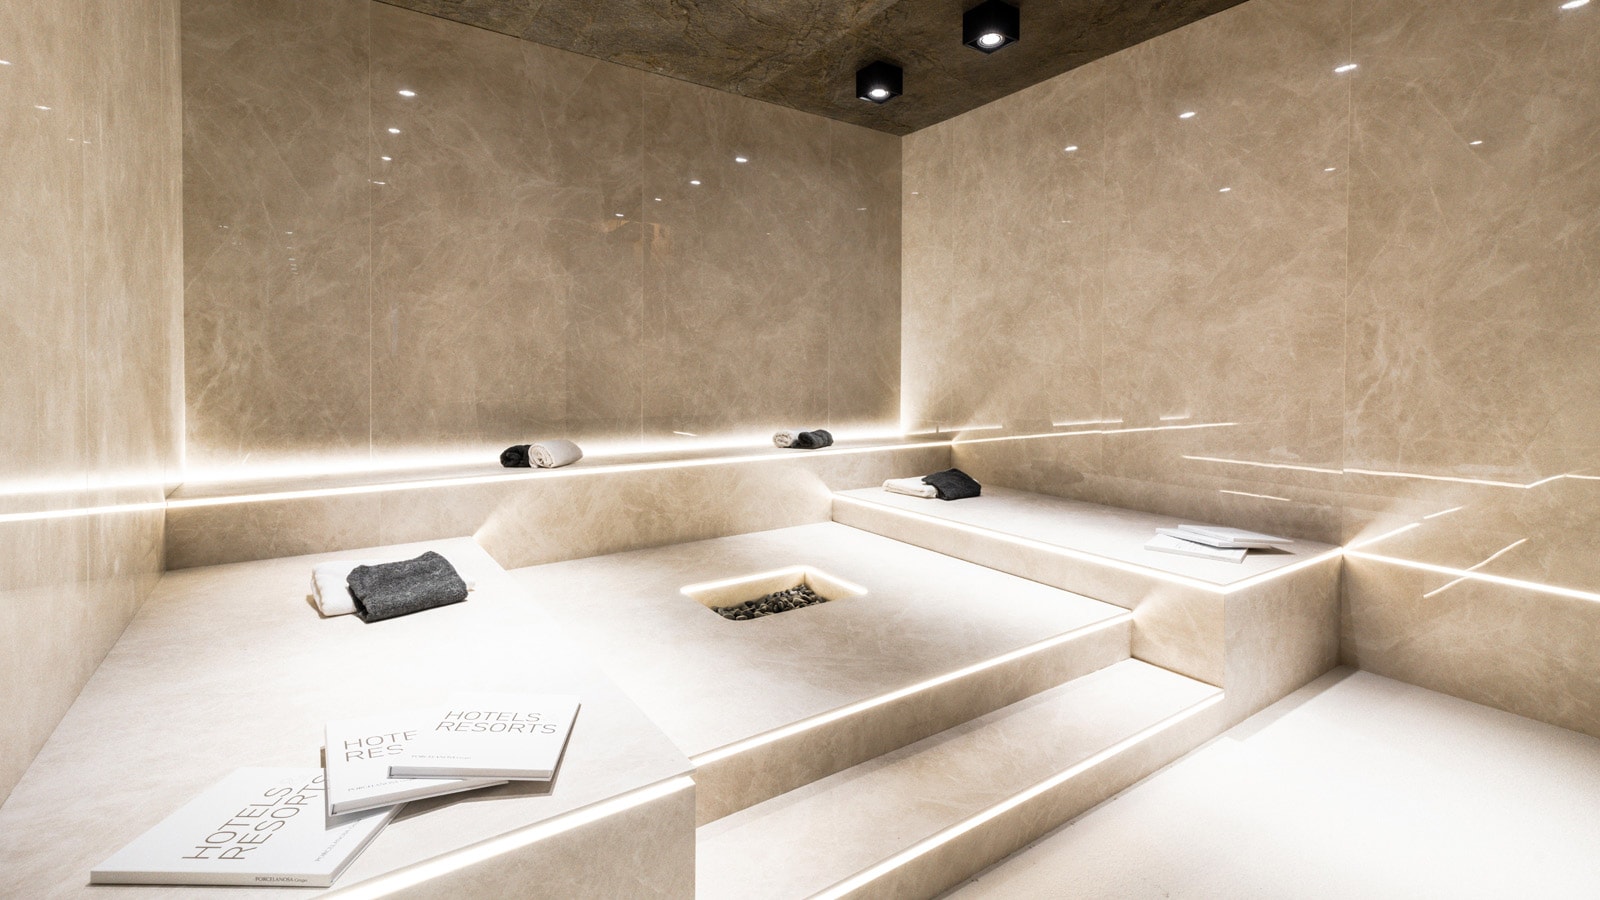 The PORCELANOSA Grupo and the Hotel Technological Institute joins forces at FITUR 2019 with a technological space and Wellness